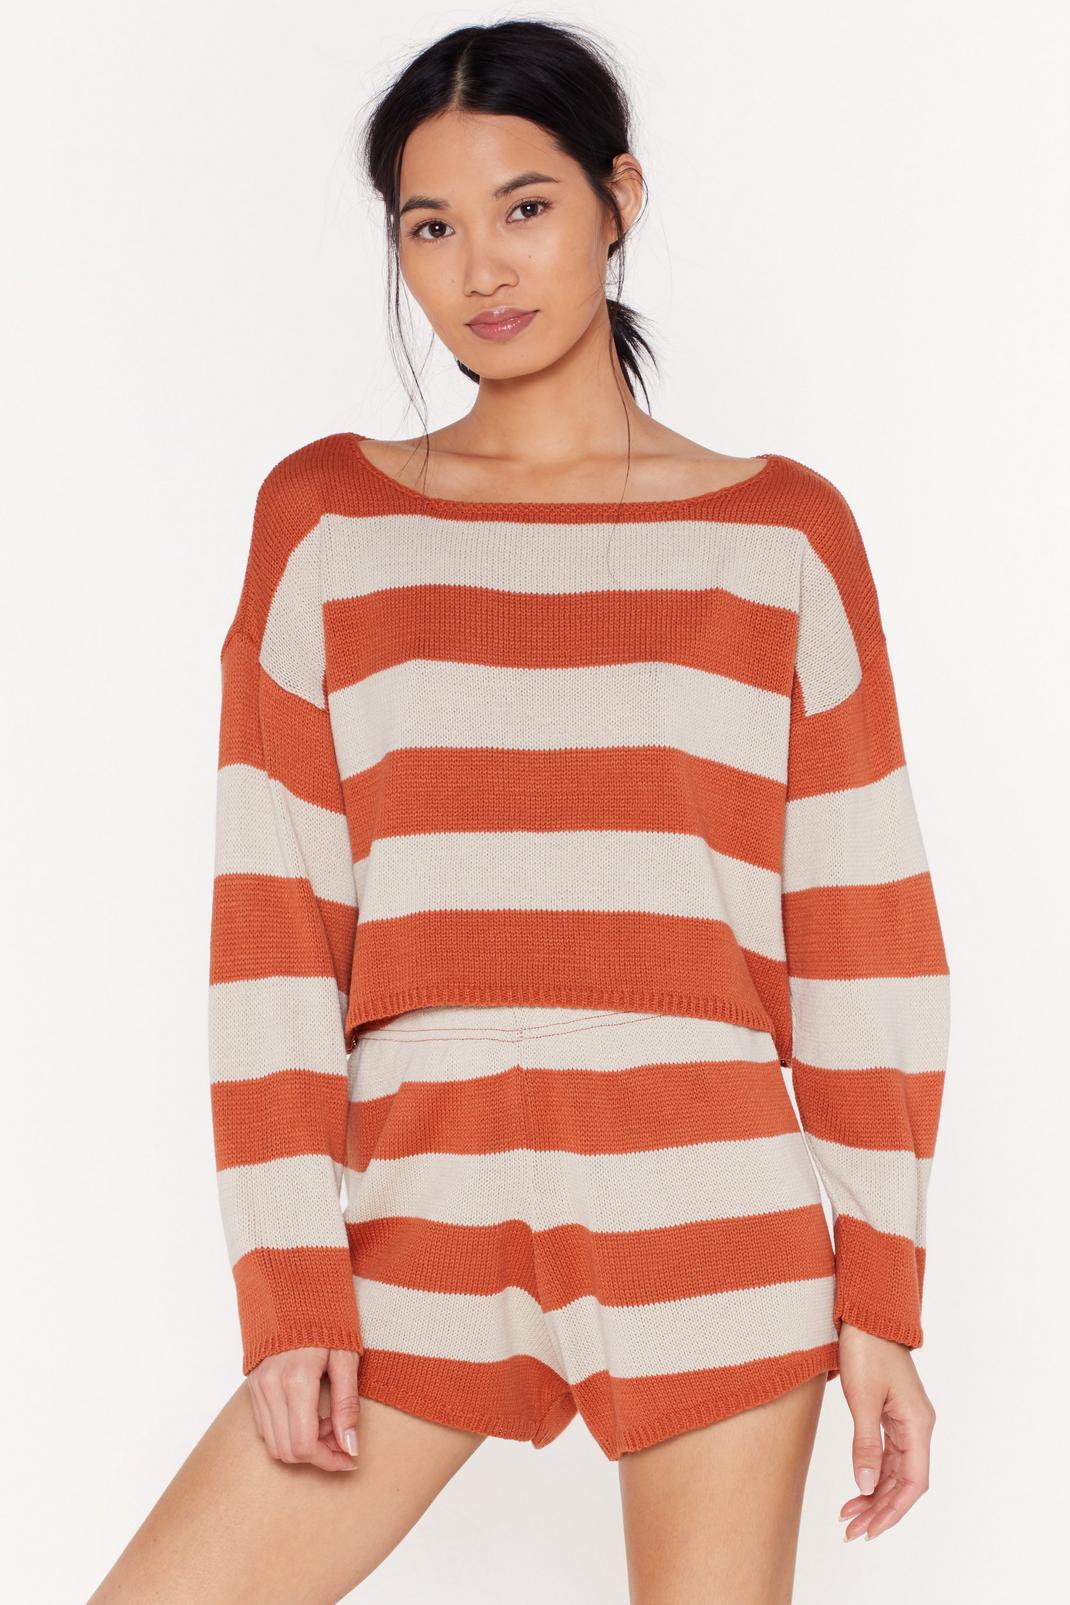 Escape Artist Striped Sweater and Shorts Lounge Set image number 1